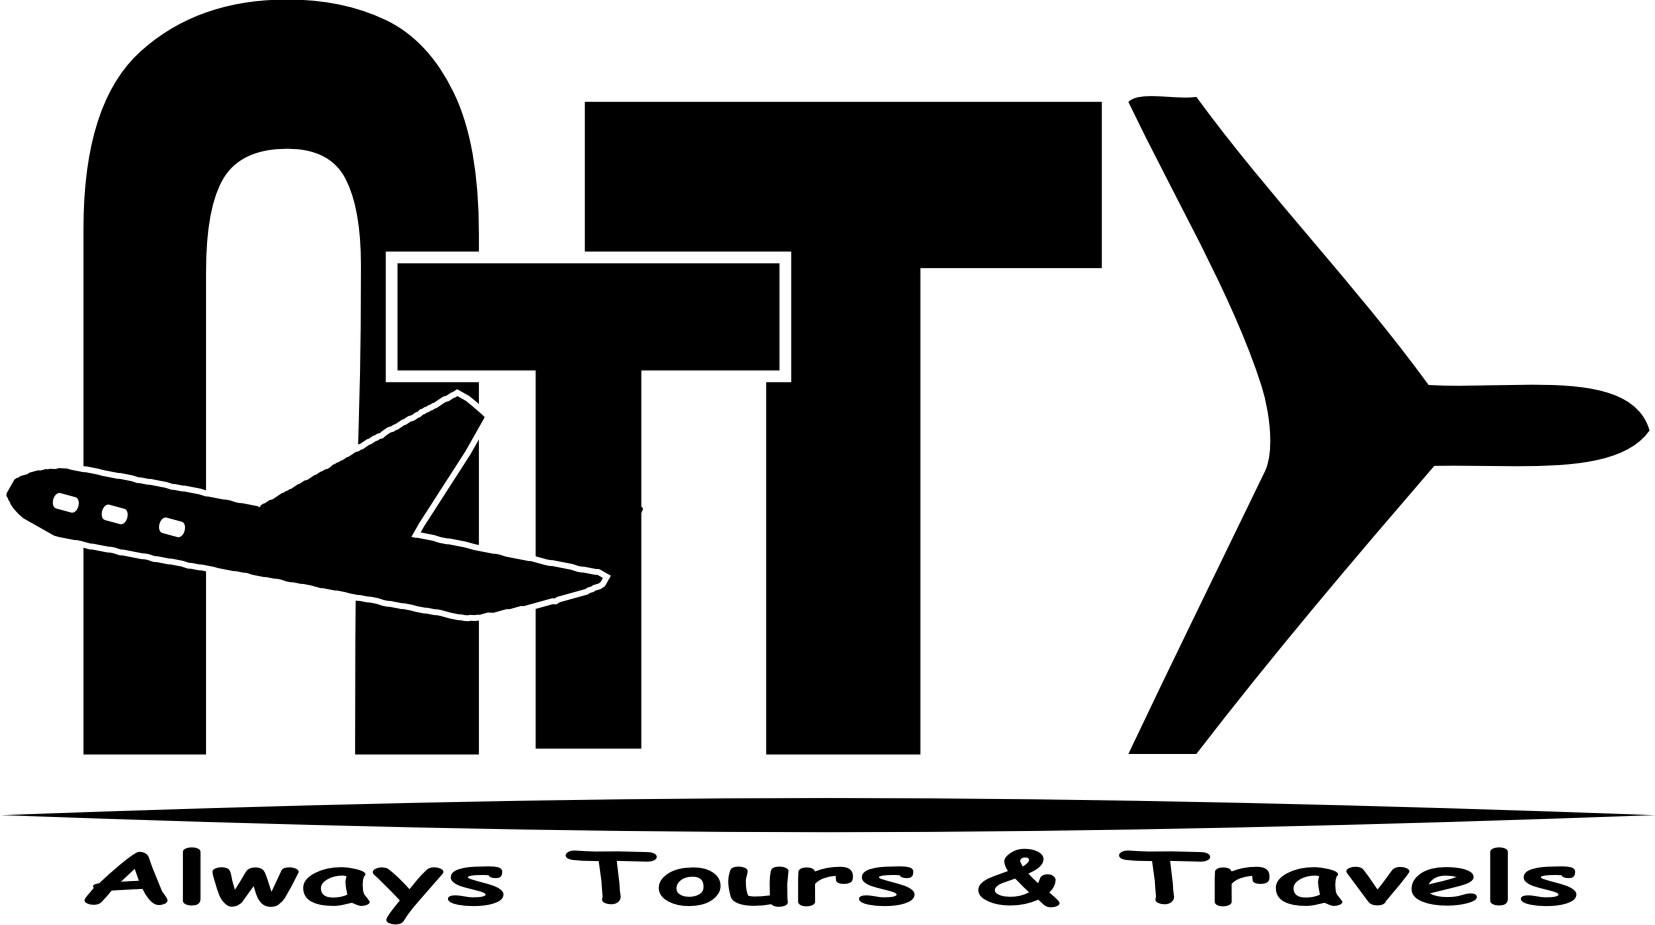 ALL-WAYS TOURS & TRAVELS